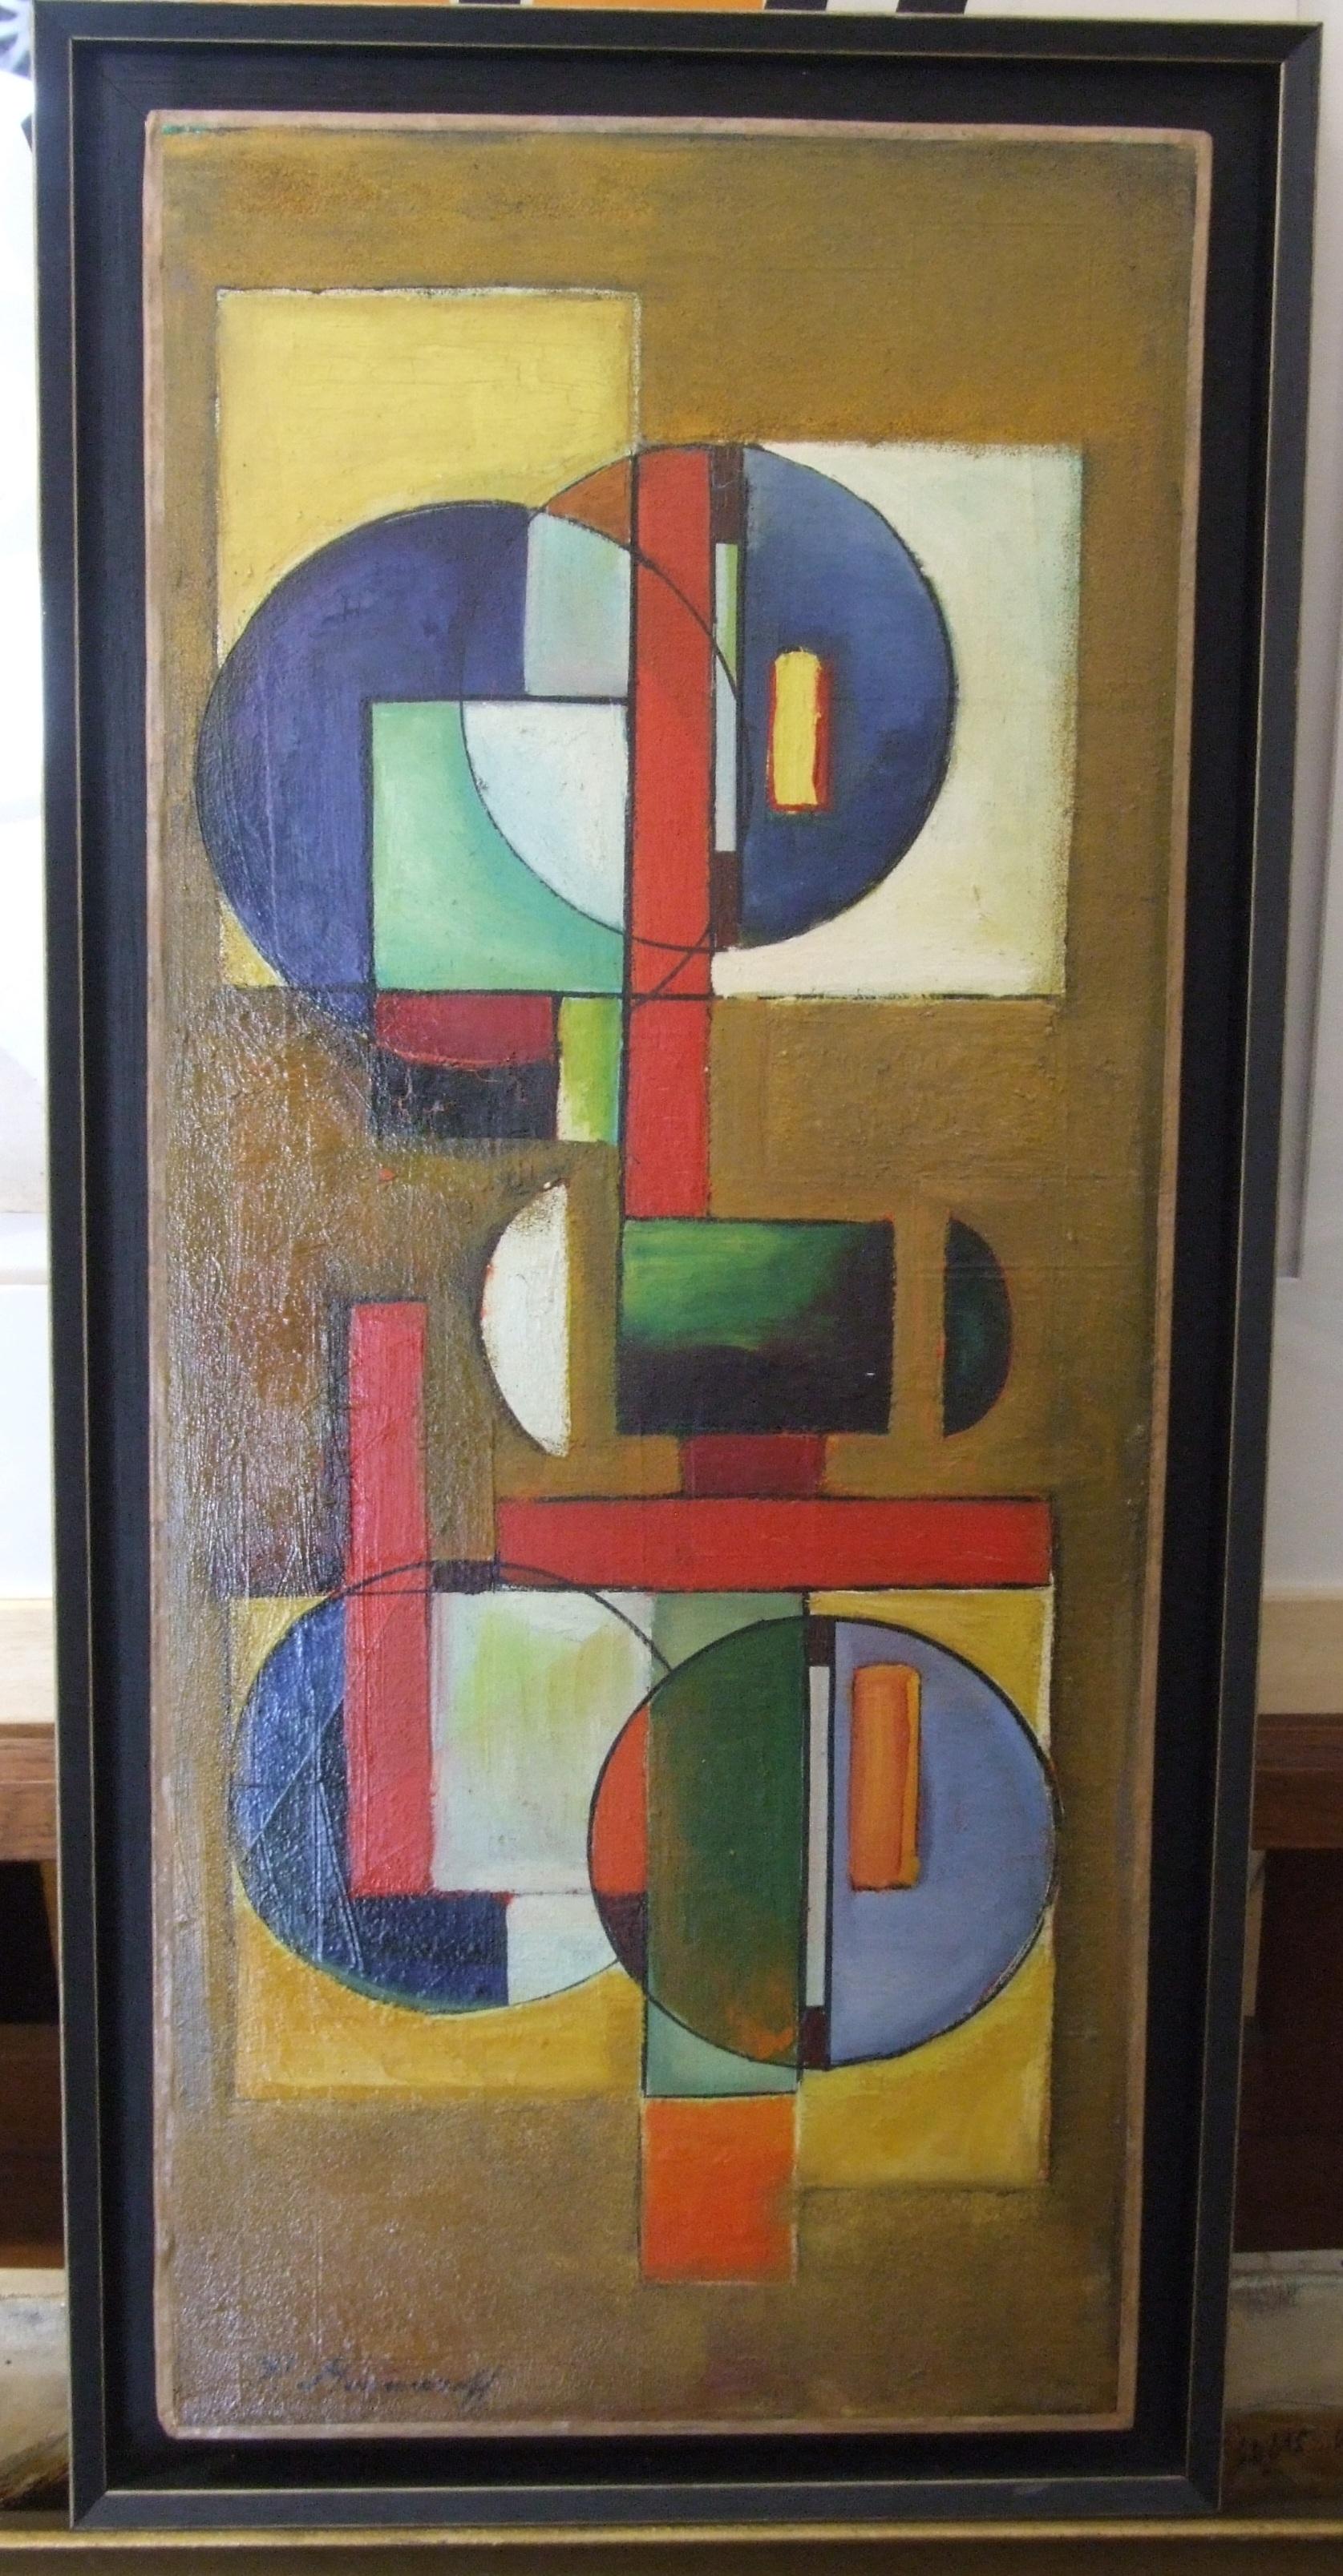 ABSTRACT GEOMETRIC - Painting by Paul Mansouroff